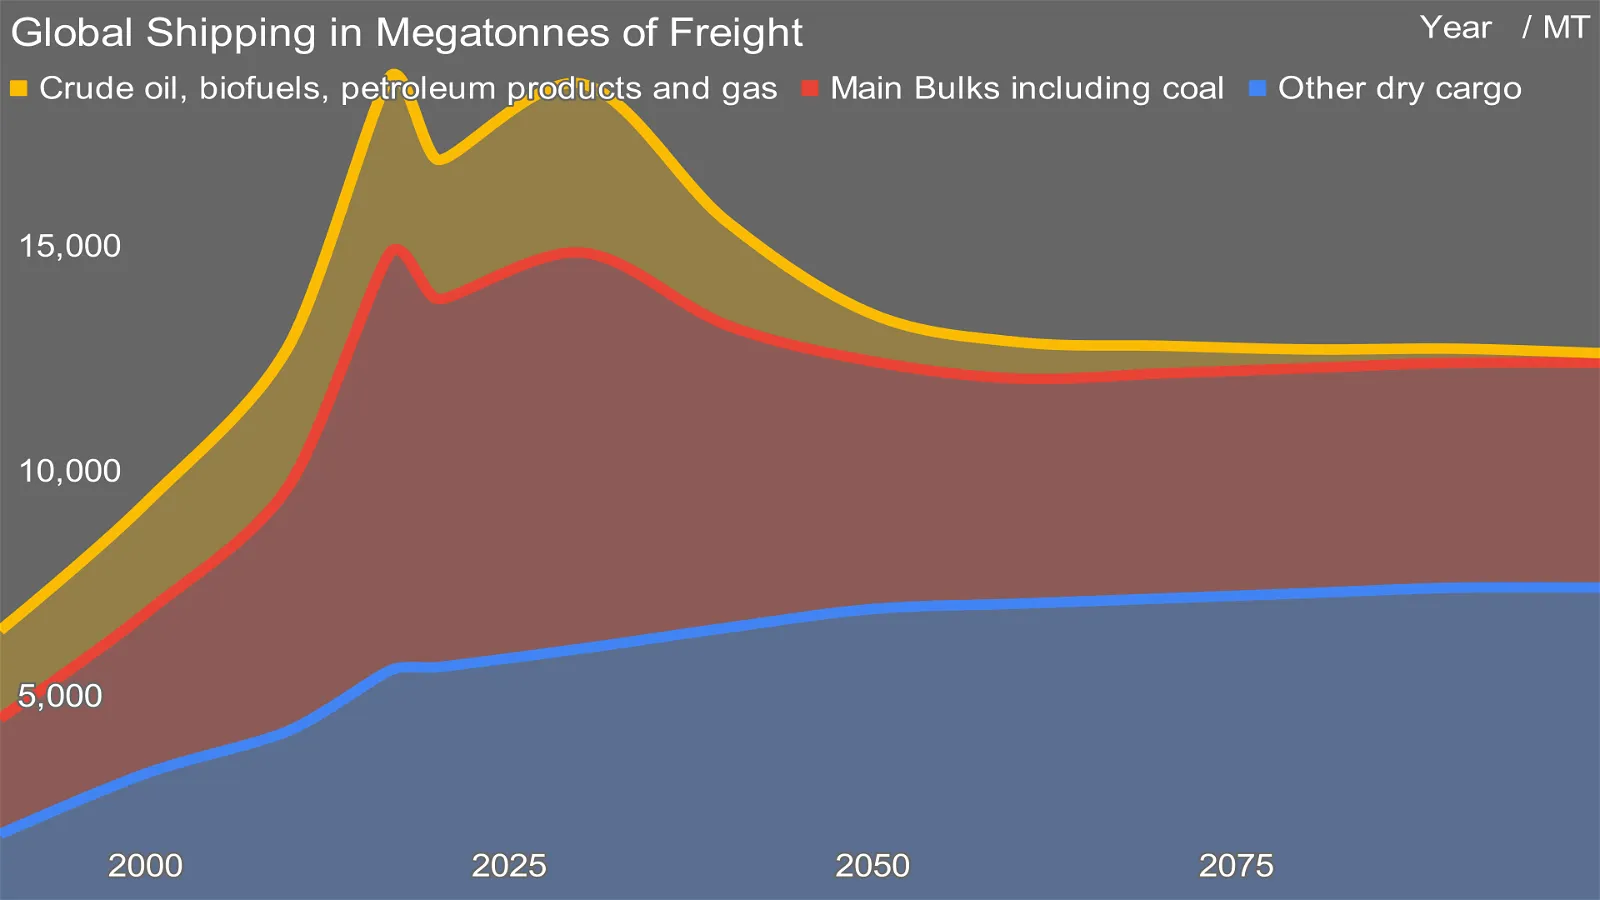 Tons of freight shipping through 2100 projection by author